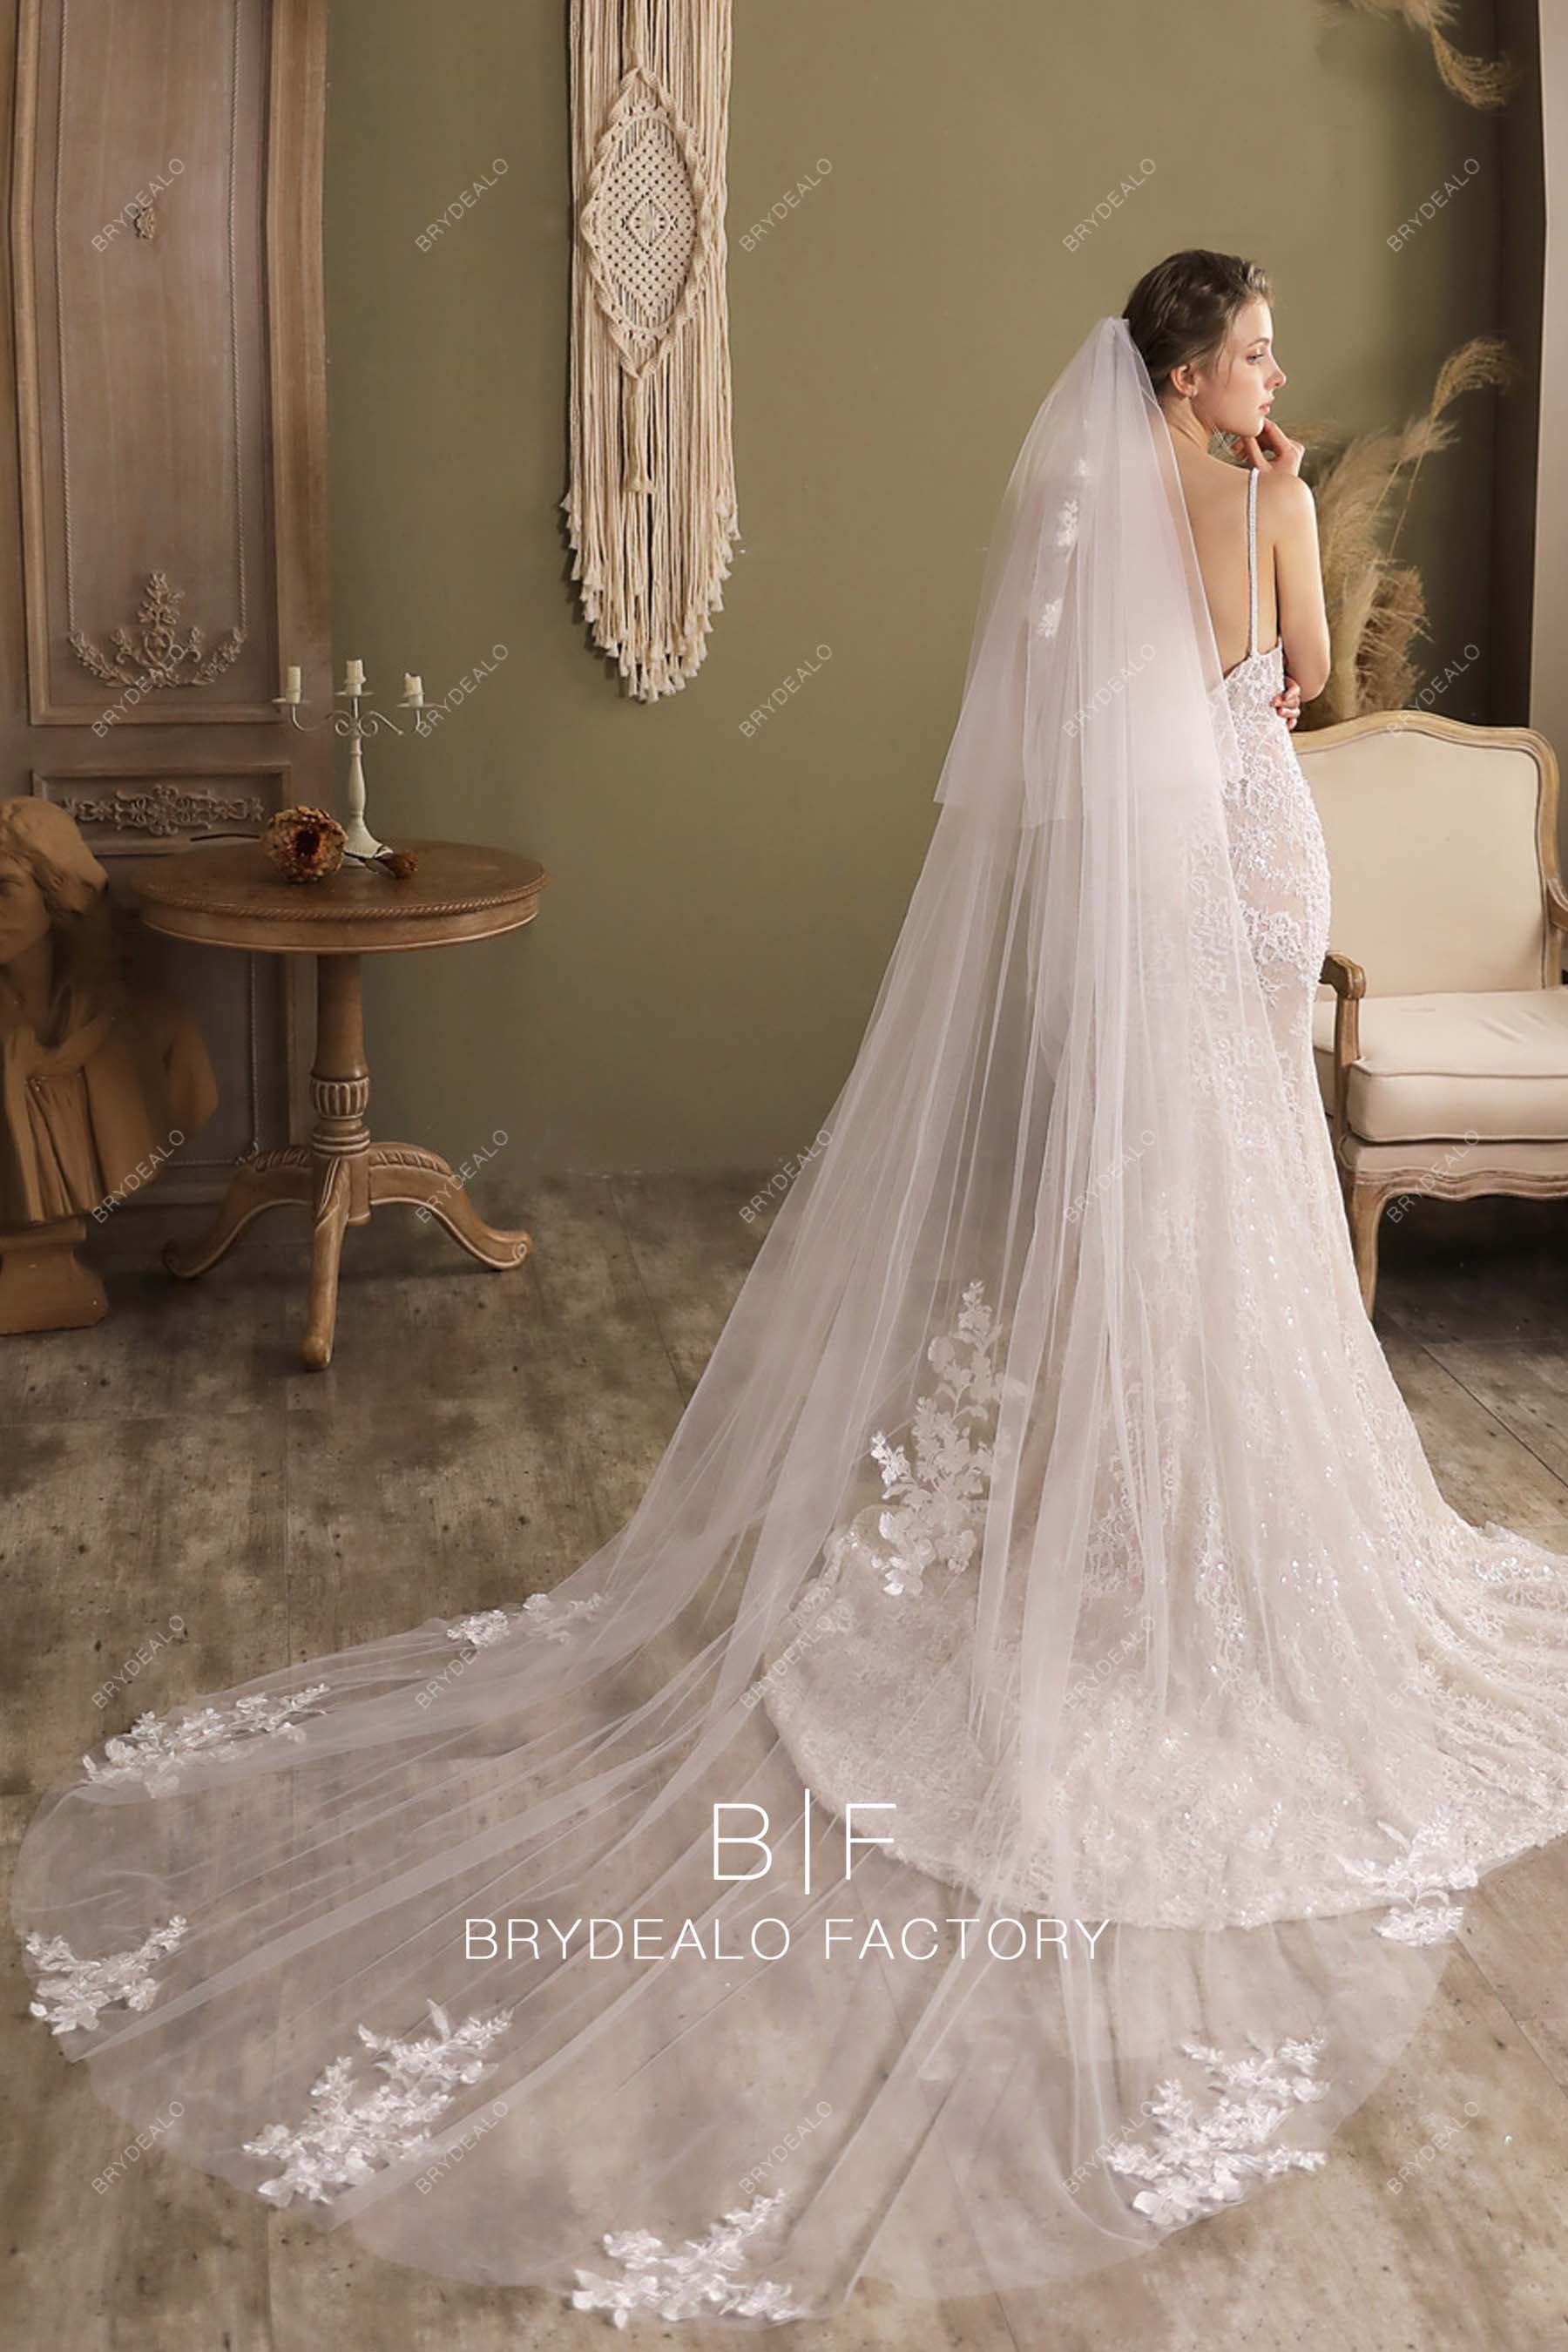 Exquisite Lace Two Tiered Long Wholesale Wedding Veil